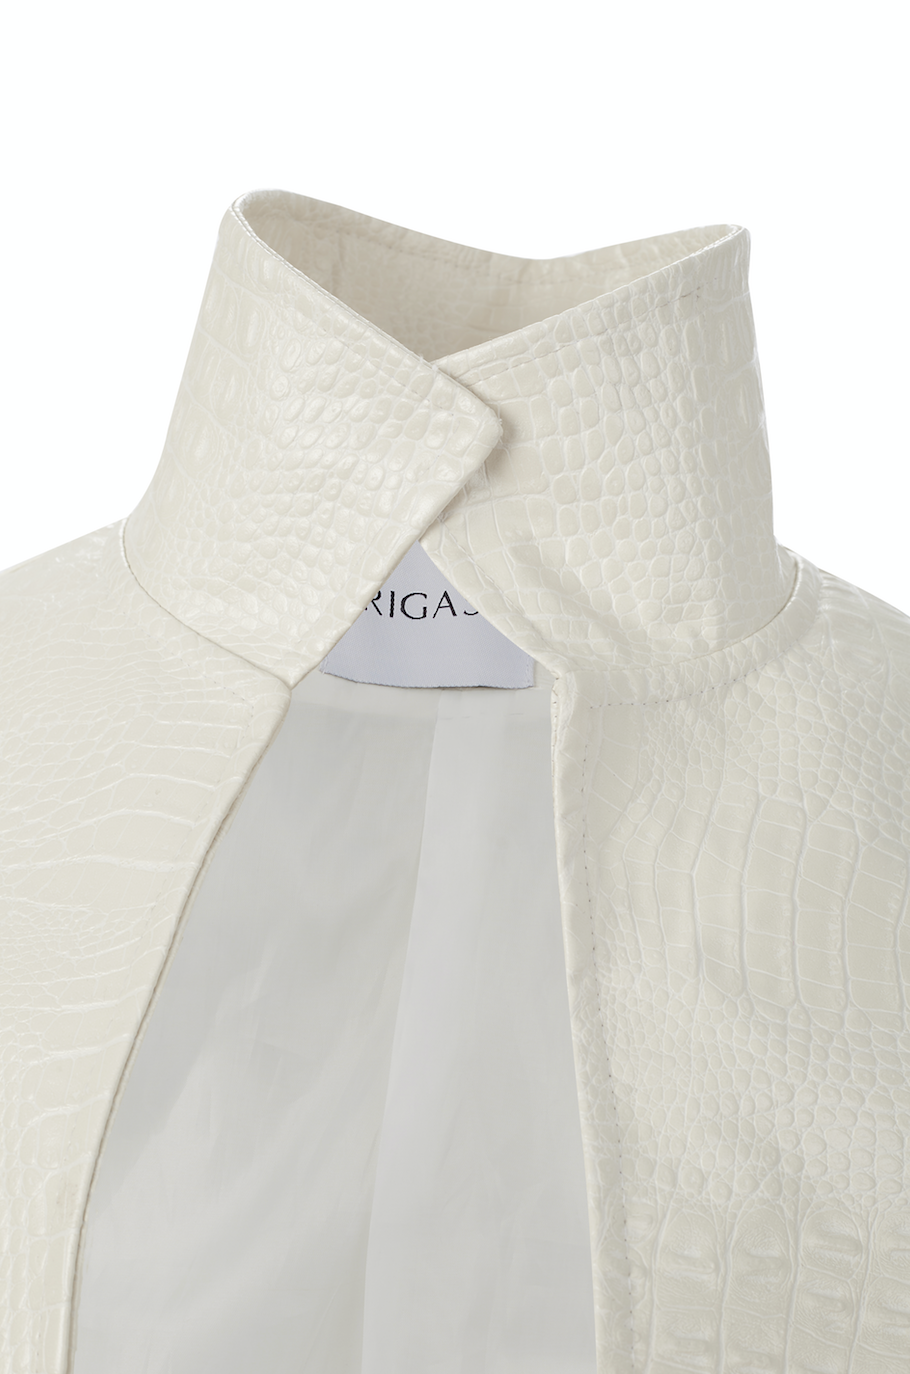 Pearl white faux crocodile leather blazer with a high neck collar and front cut out. rigash